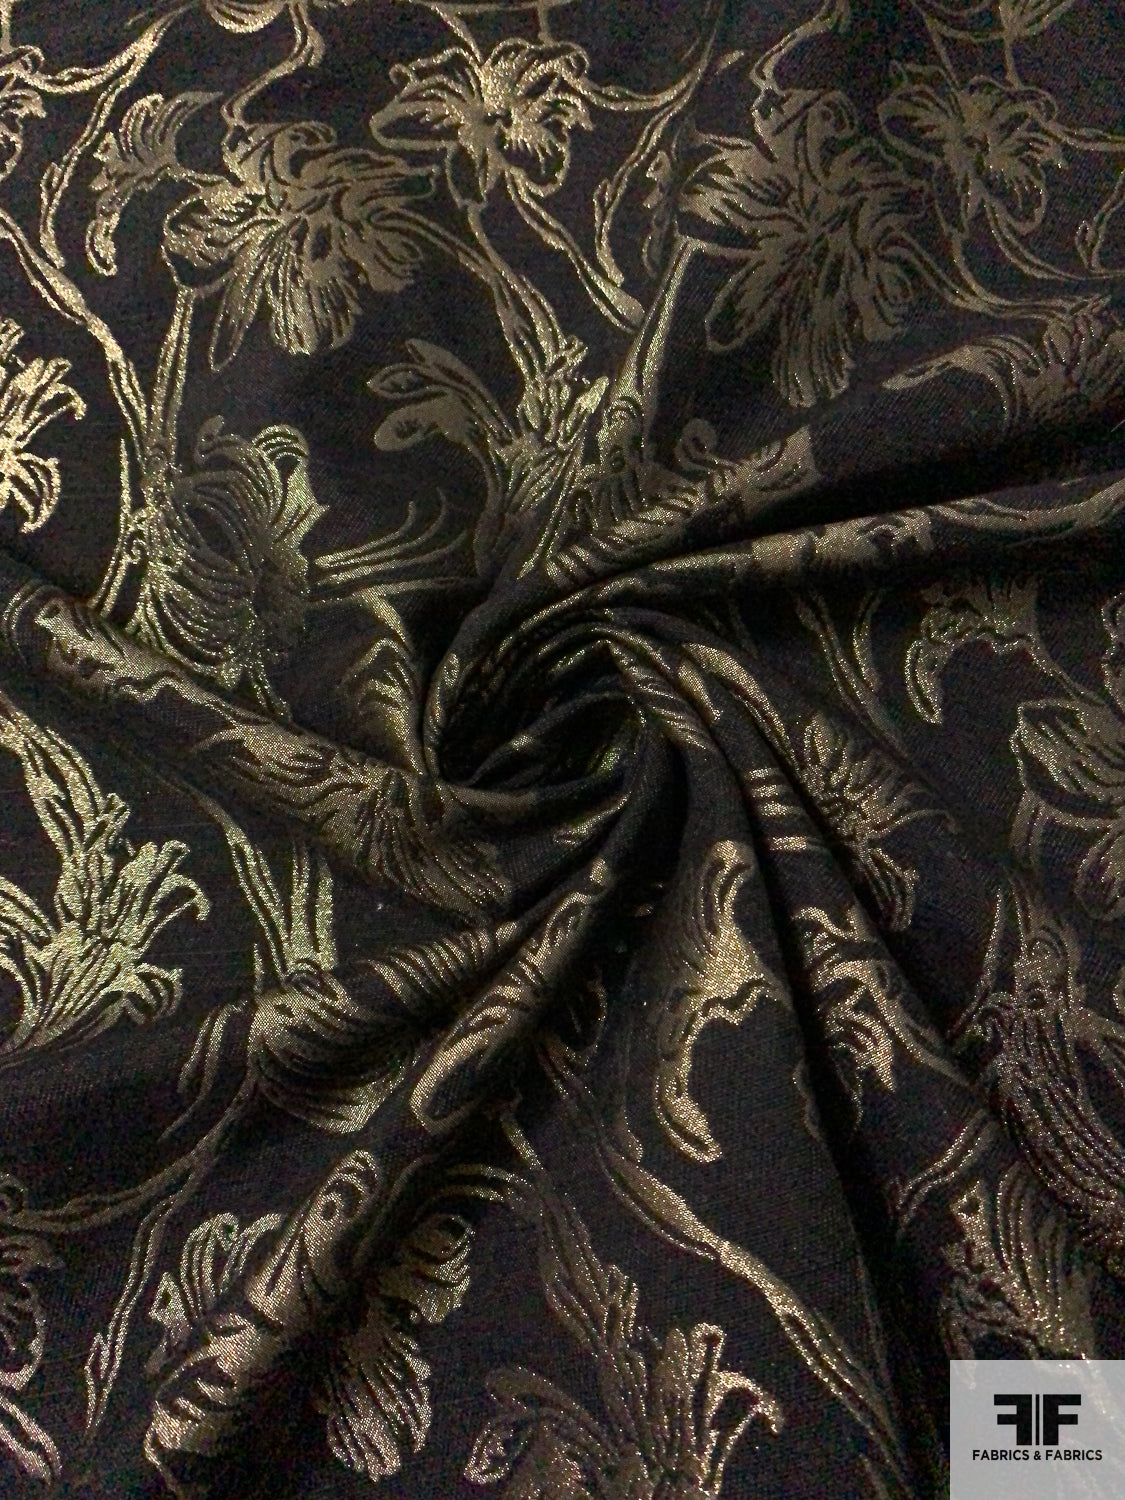 Vine Floral Metallic Brocade - Antique Gold / Black - Fabric by the Yard